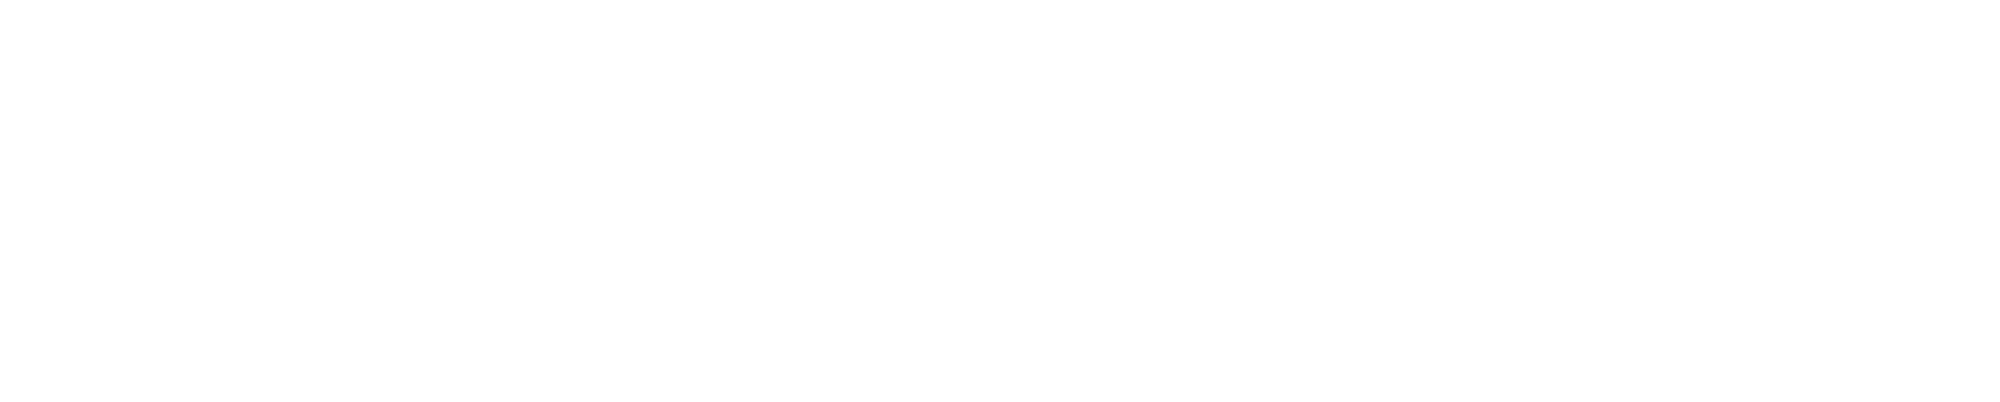 U of a Black and White Logo - The University of Chicago Library - The University of Chicago Library